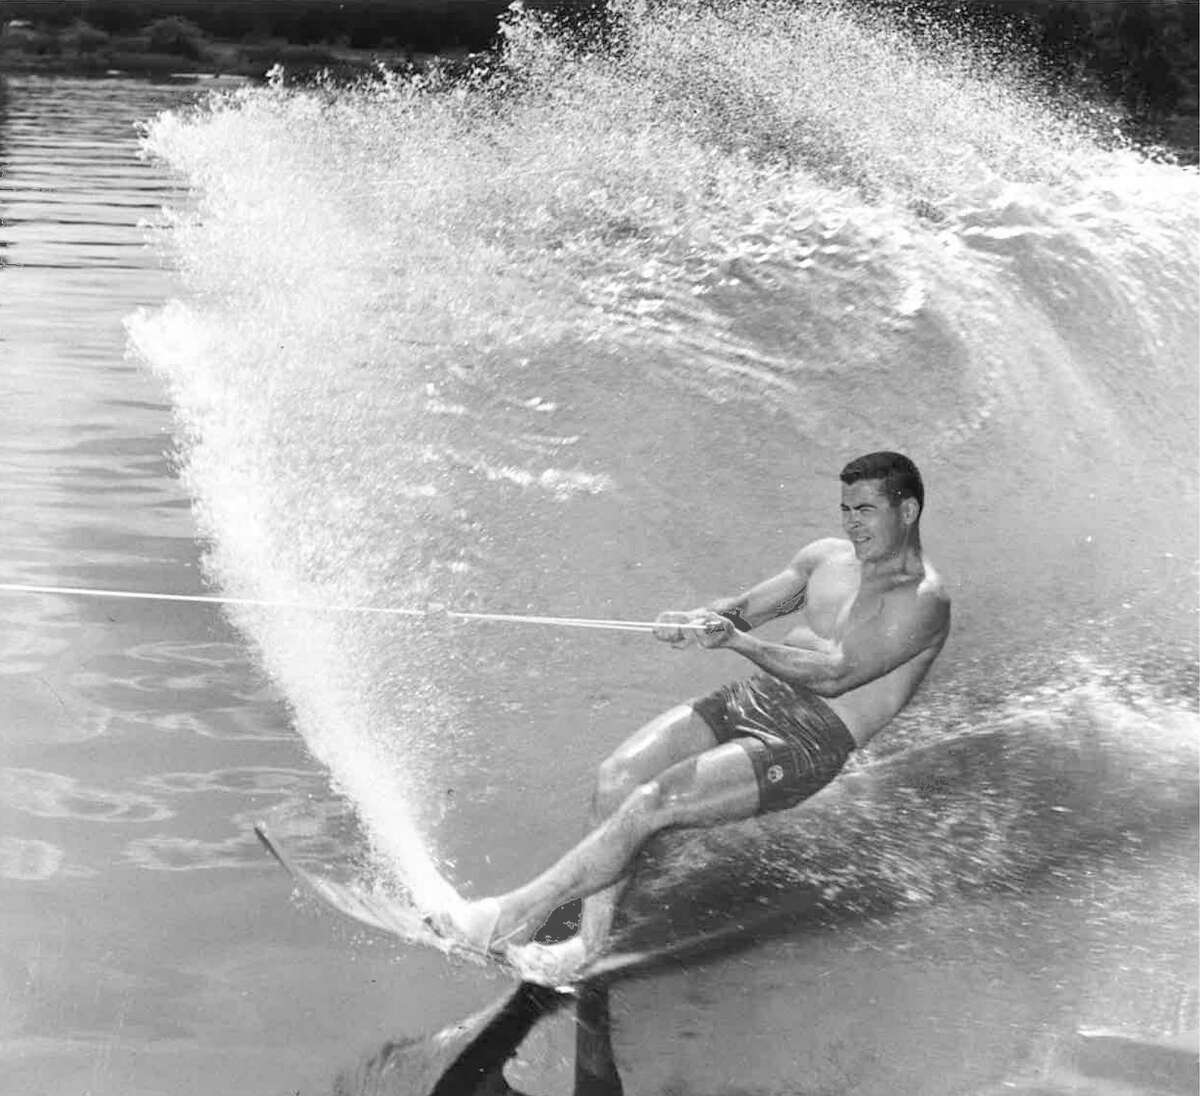 Dairy store entrepreneur extraordinaire Stew Leonard displays the form that made him a North American water ski champion in 1956.